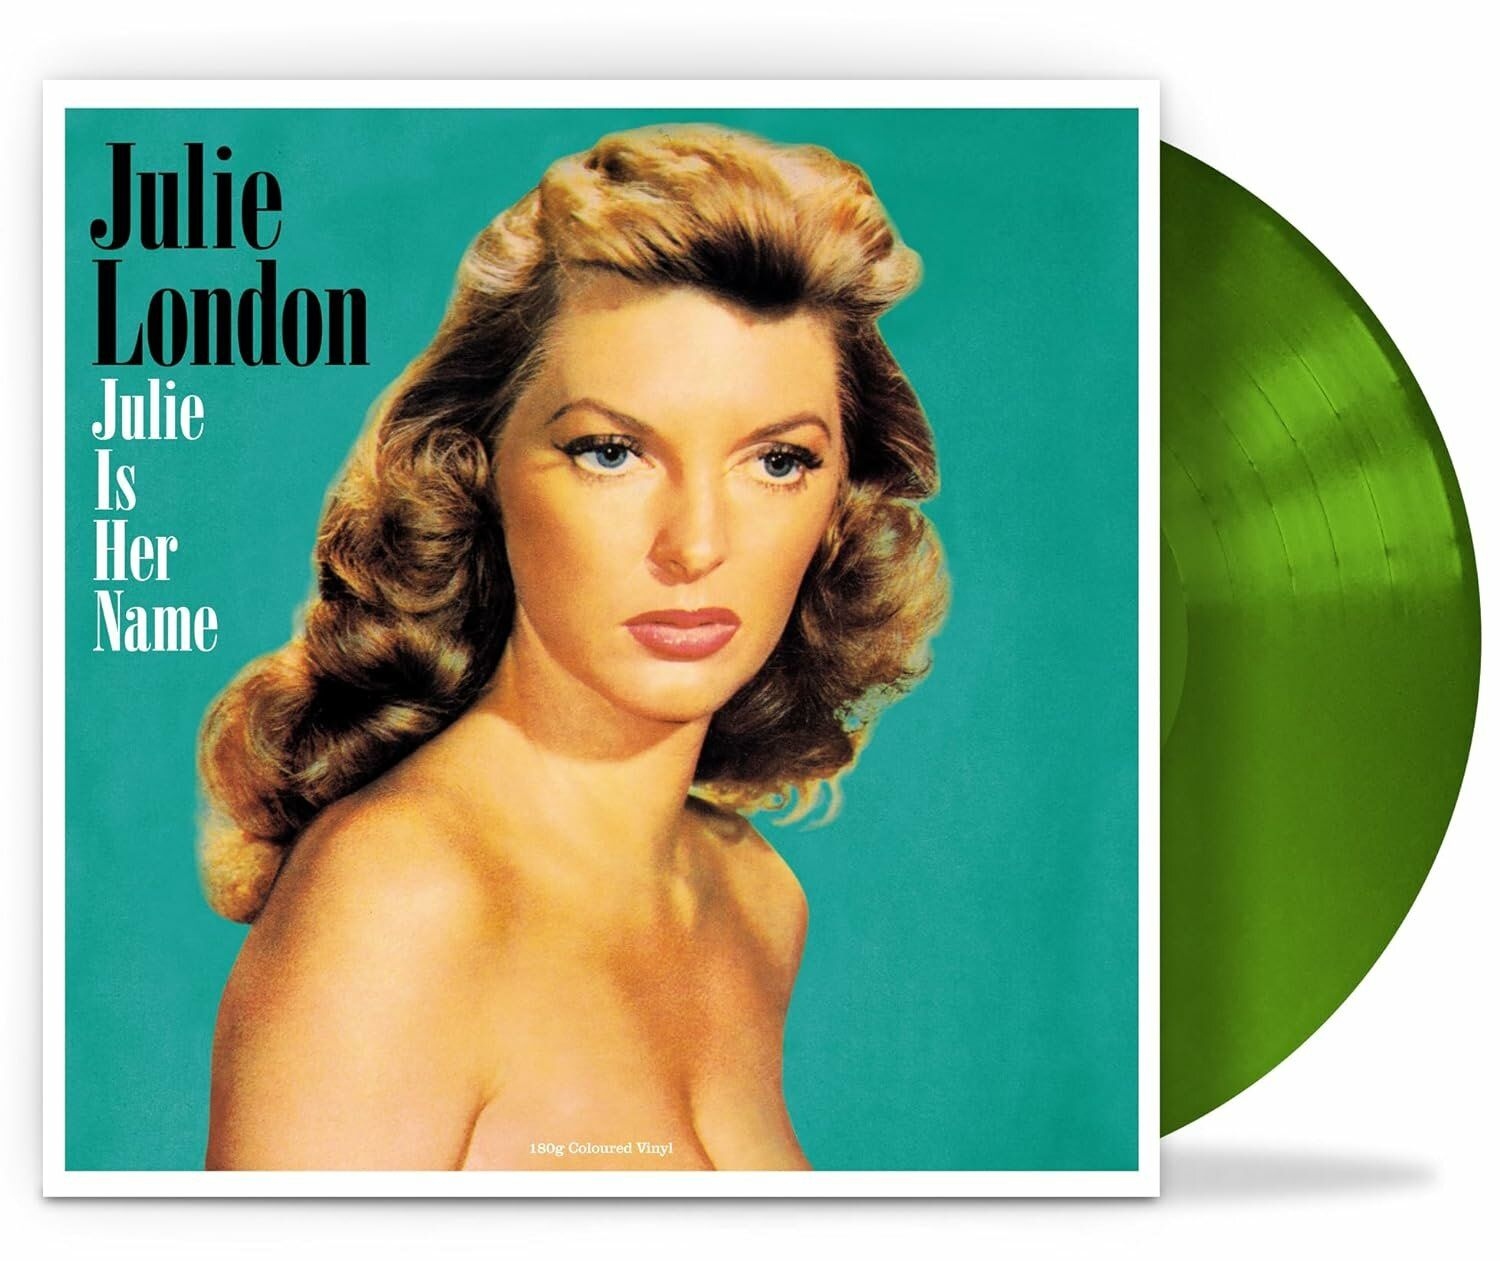 виниловая пластинка julie london julie is her name limited edition lp Виниловая пластинка London, Julie, Is Her Name (coloured) (5060348583233)